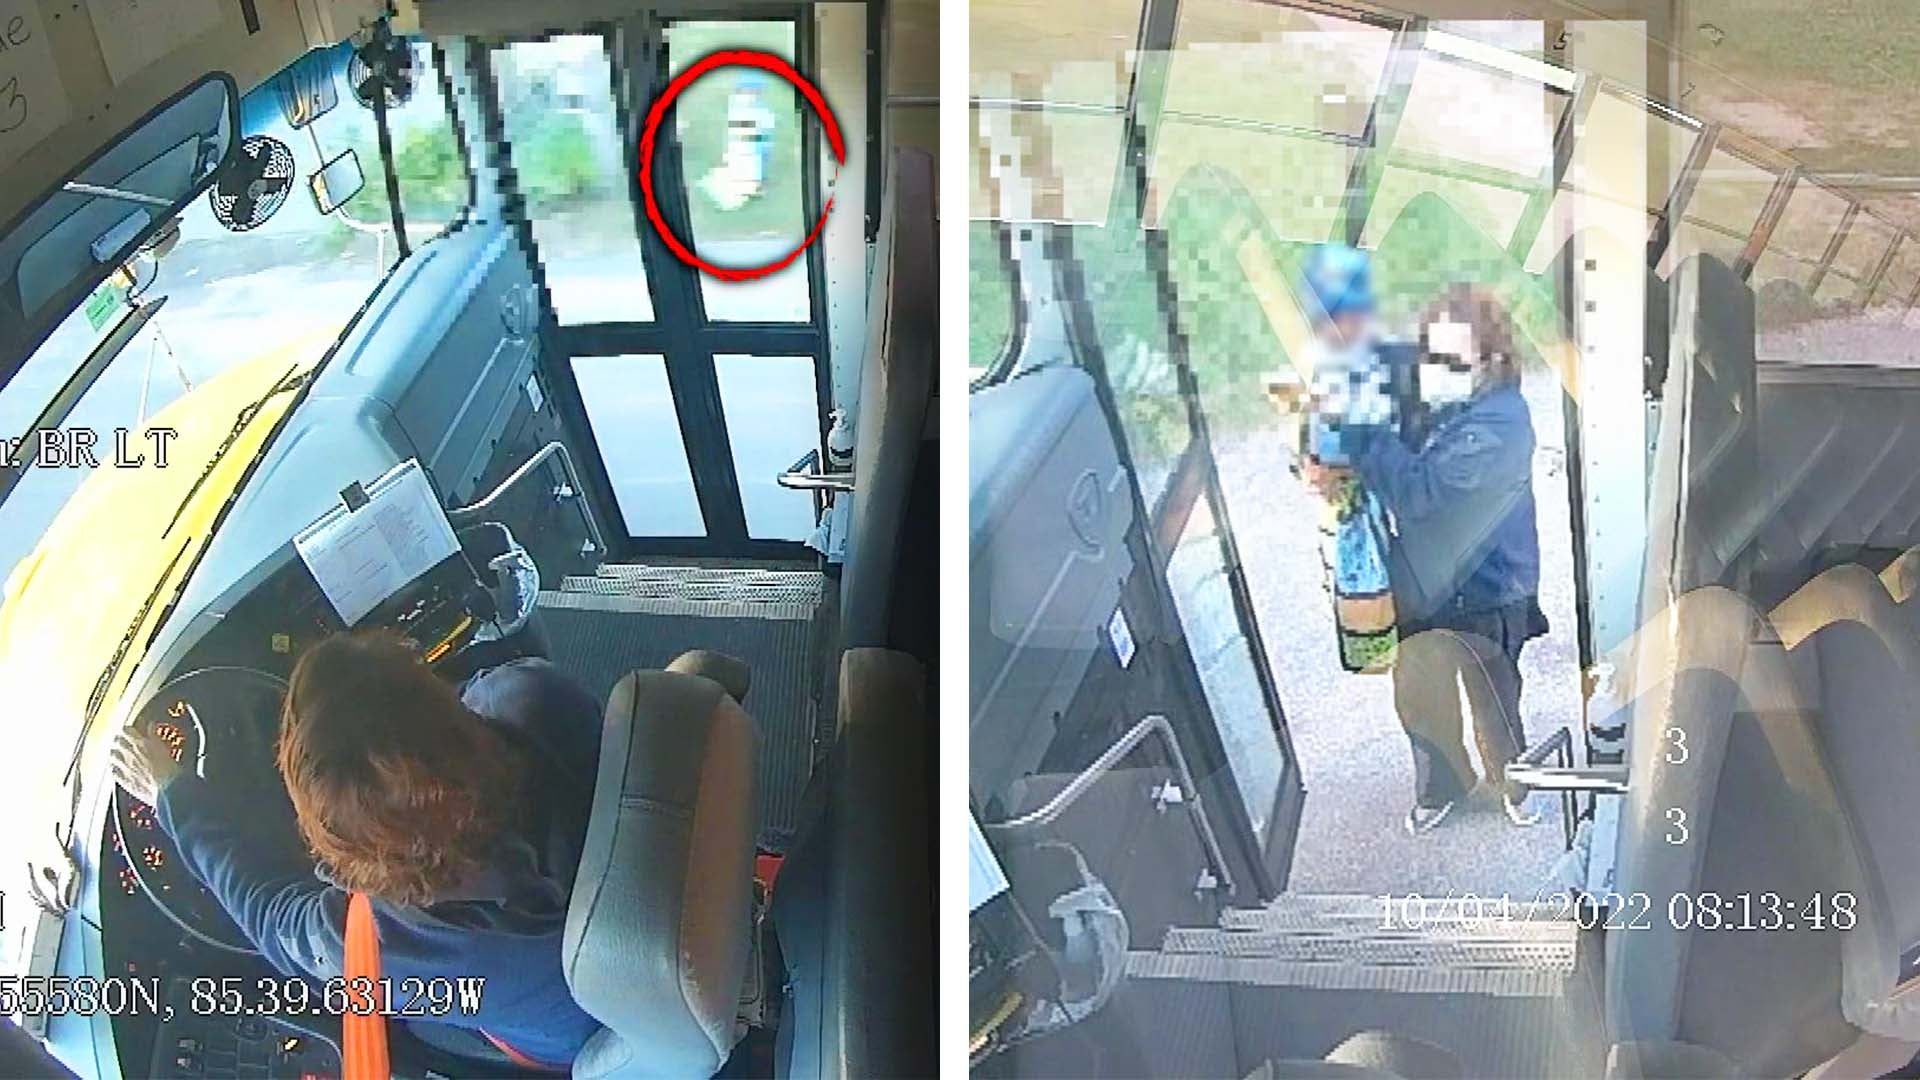 School Bus Drivers Track Down a Toddler Taken in Carjacking | Inside Edition